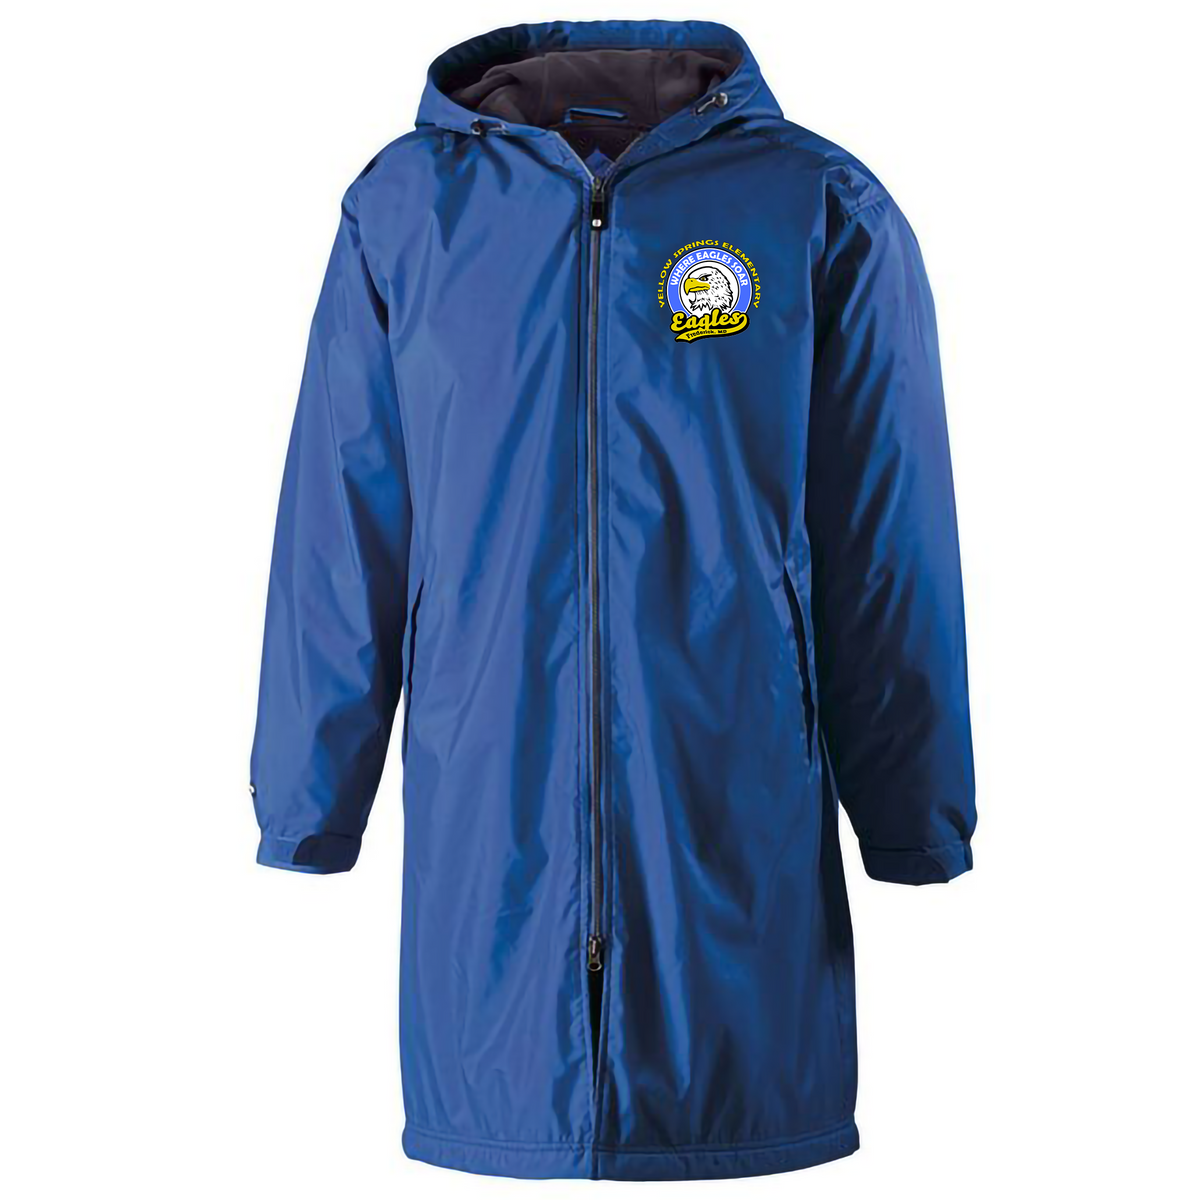 Yellow Springs Elementary School Holloway Conquest Jacket